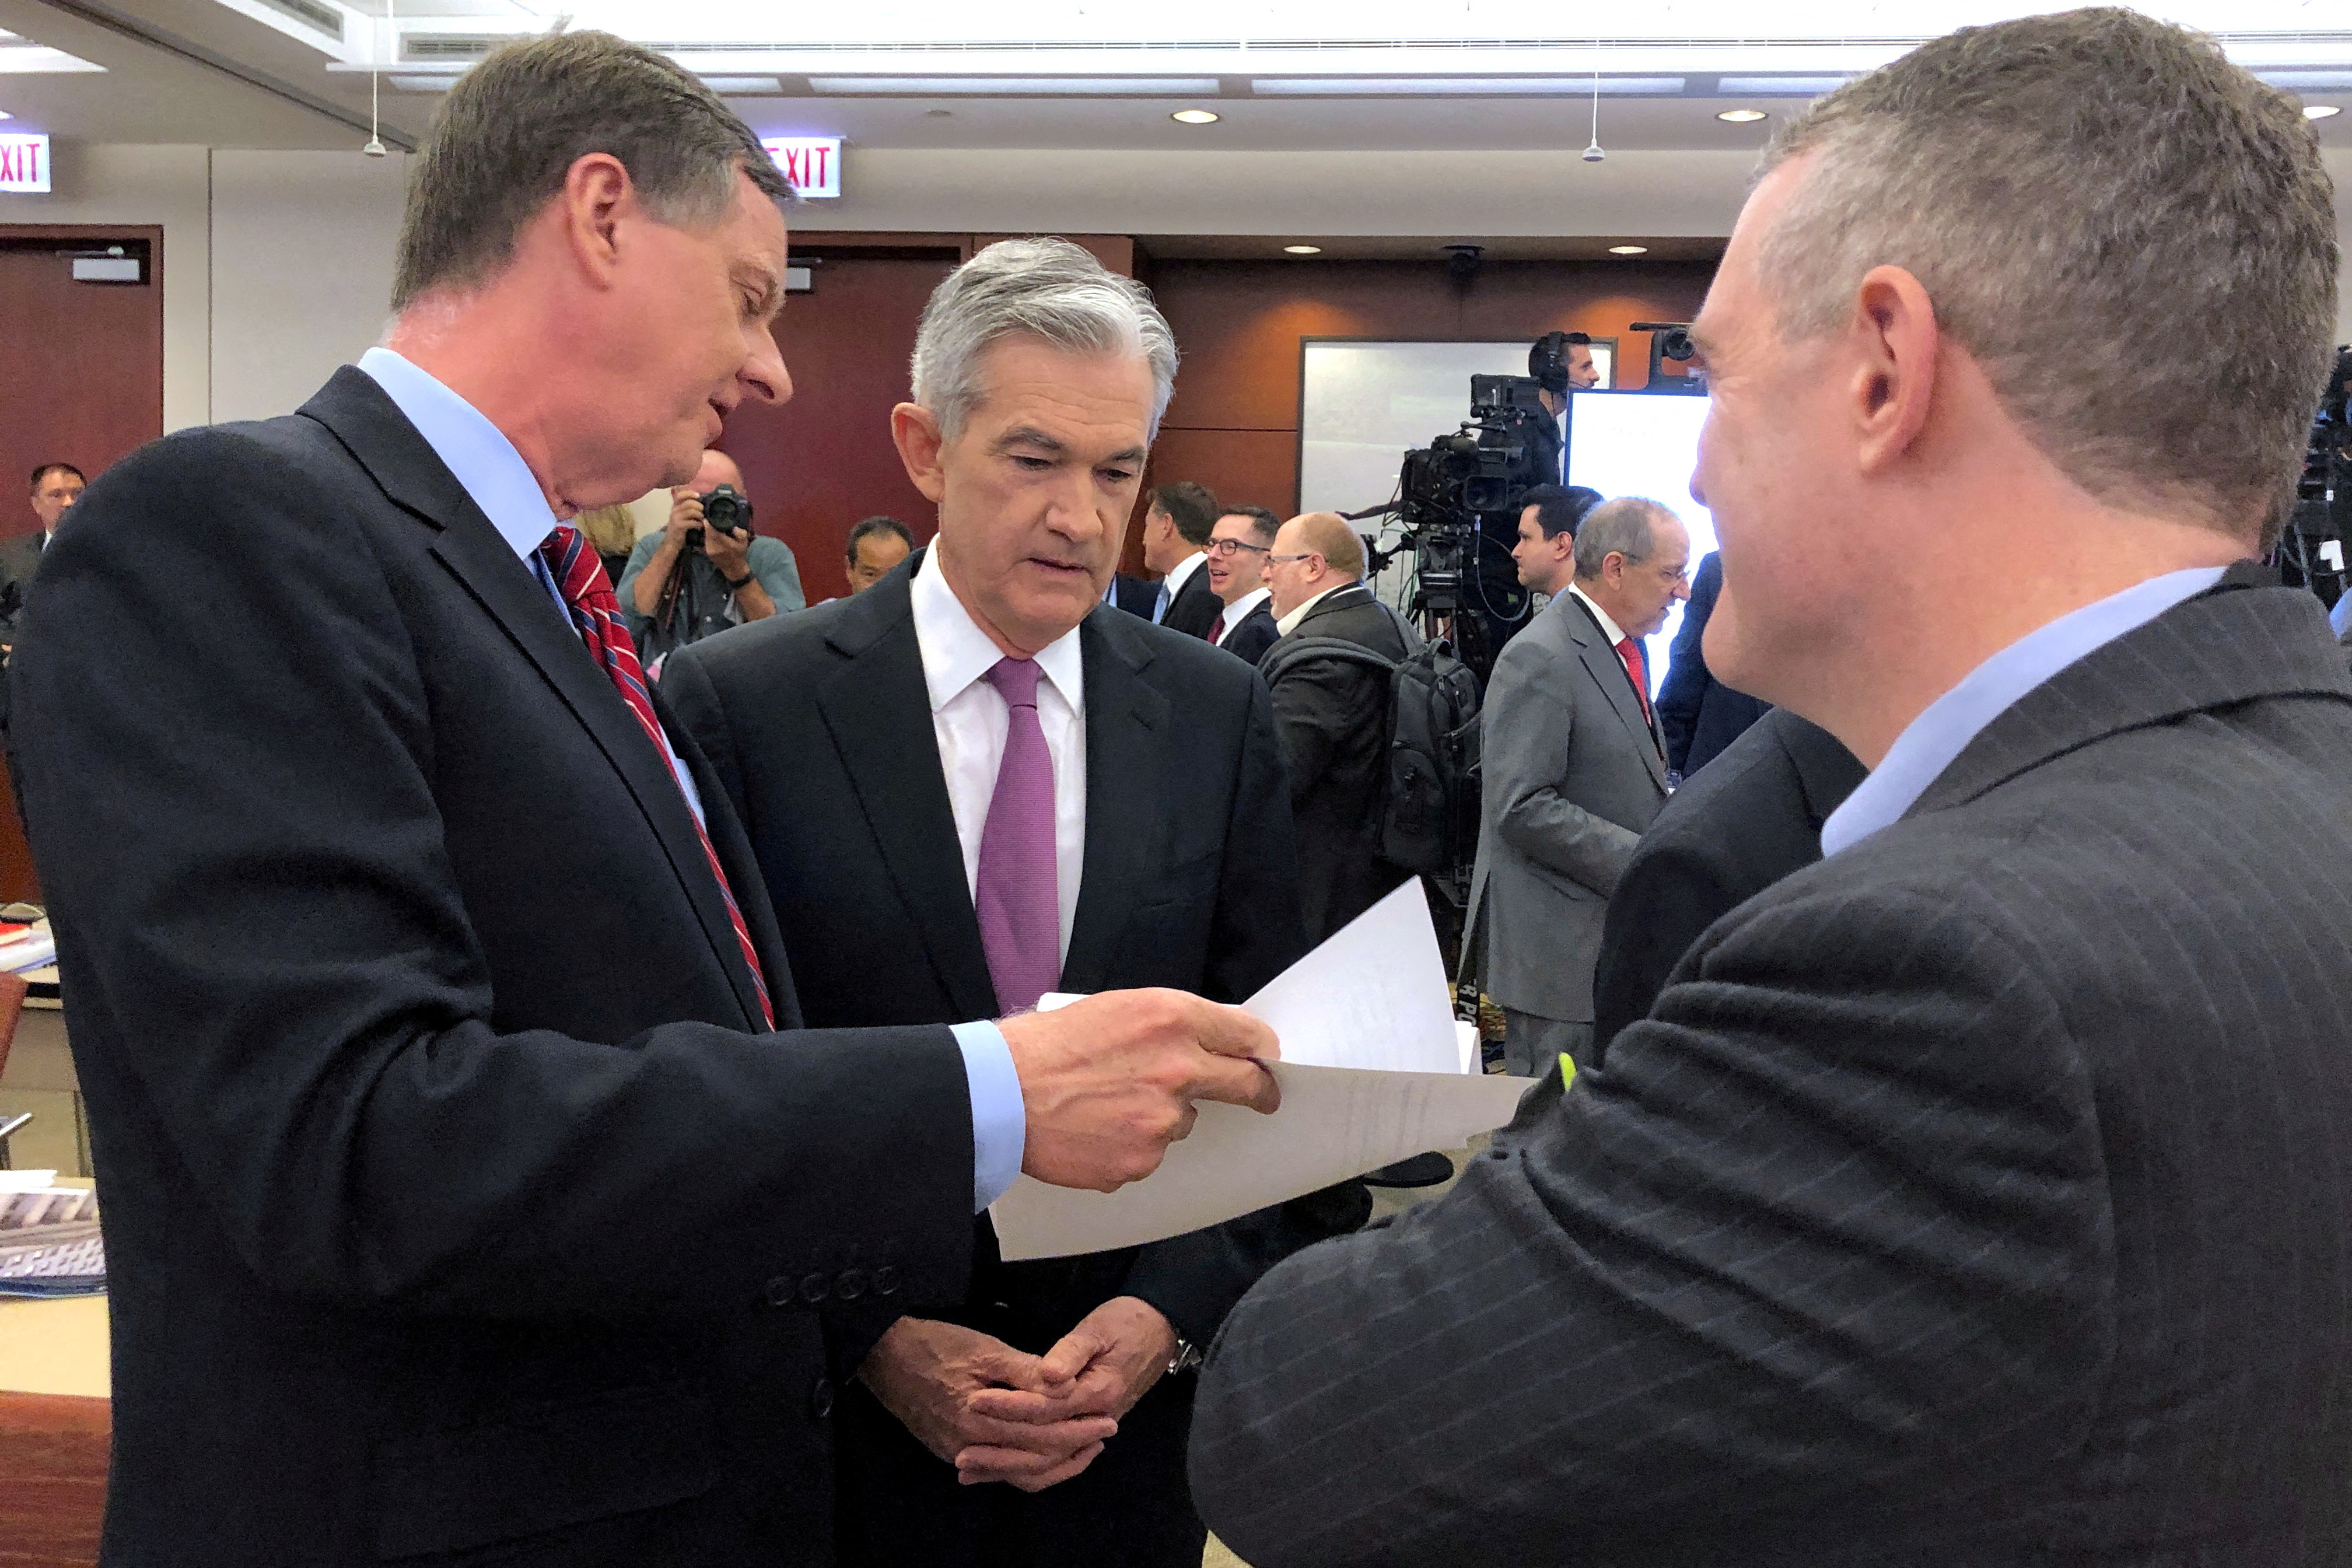 Federal Reserve Chair Jerome Powell speaks with Chicago Fed President Charles Evans and St. Louis Fed President James Bullard at a conference on monetary policy at the Federal Reserve Bank of Chicago